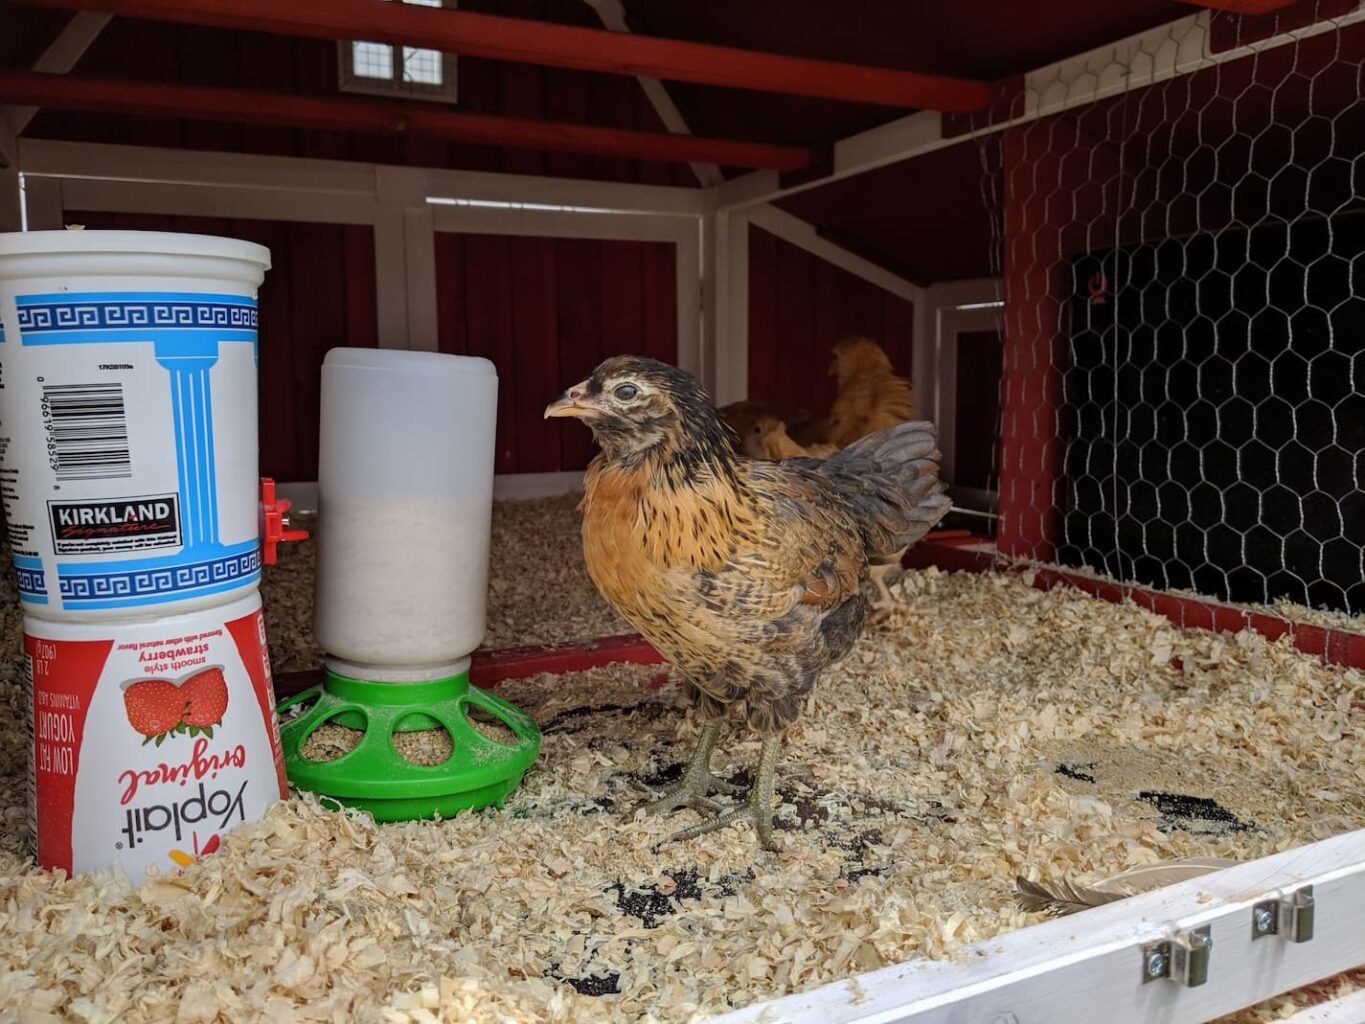 An image of our chicken named Hey hey inside the coop.